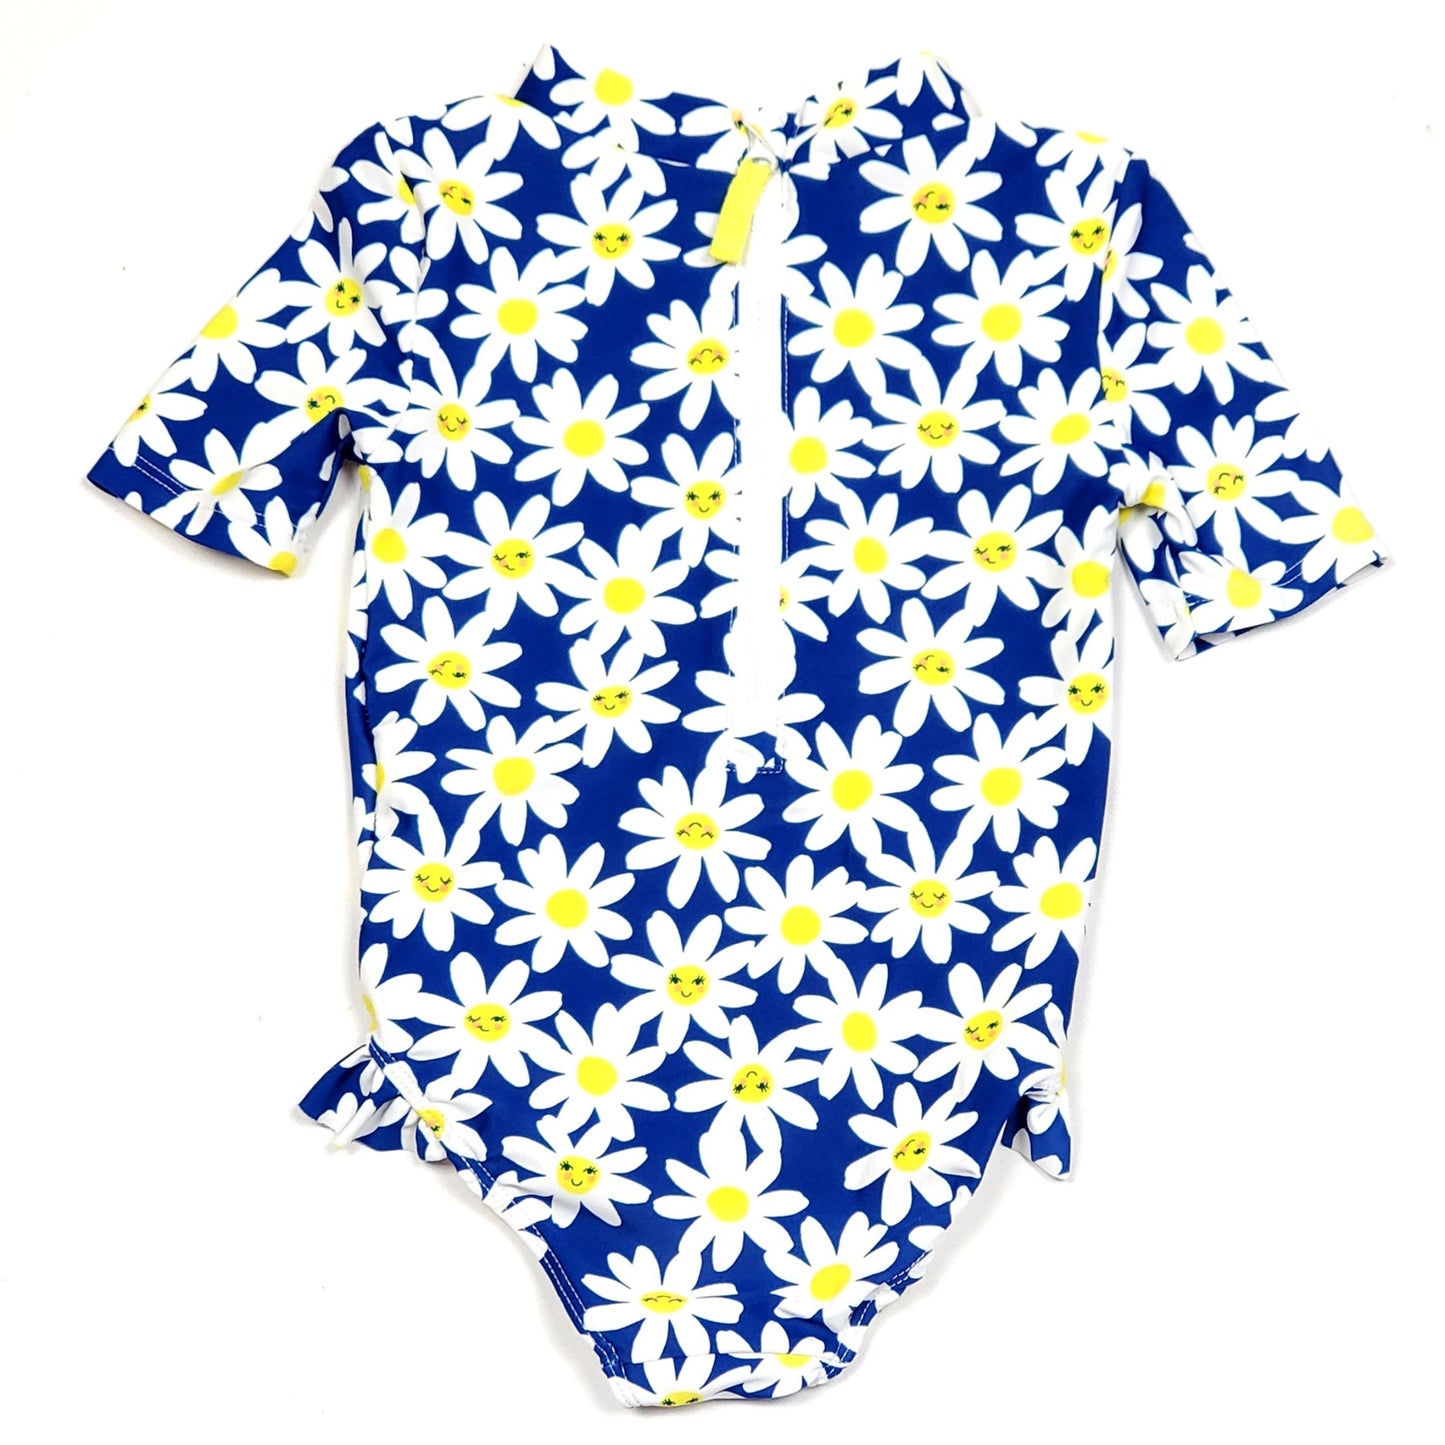 Carters Girls Daisy Floral Swimsuit 3T Used, back zipper closure